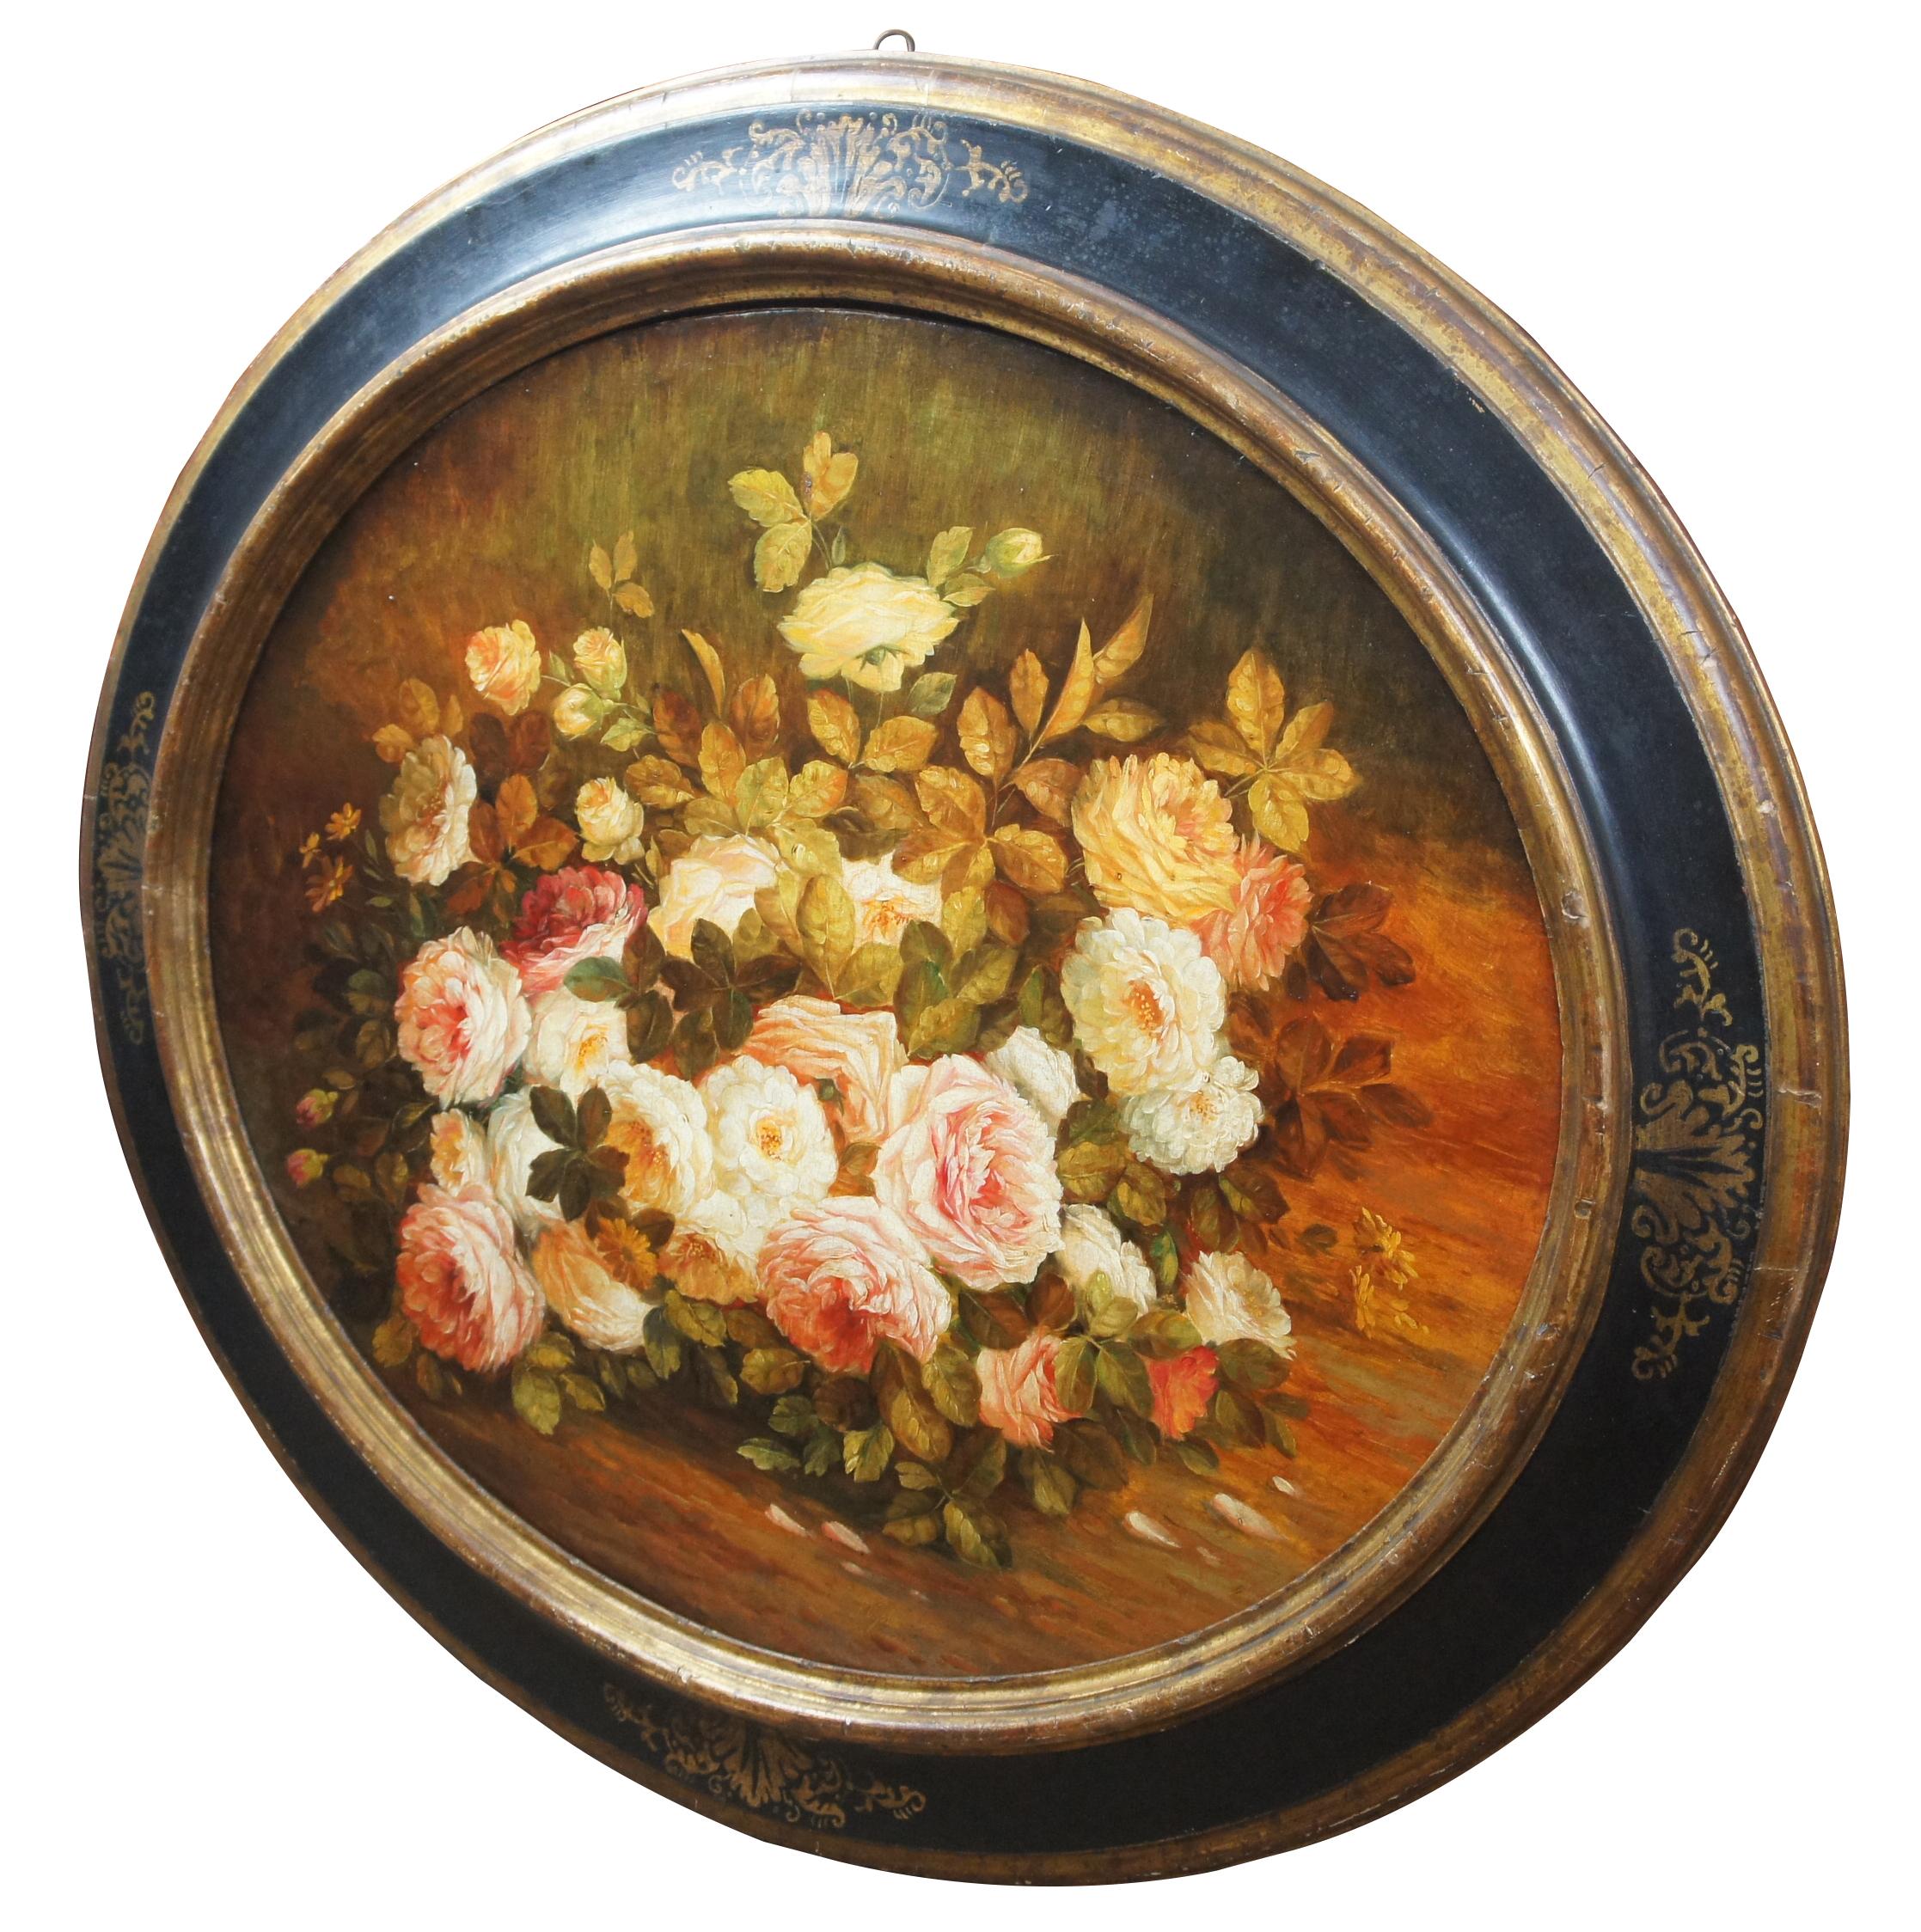 Antique oval floral still life oil painting on canvas by F. Vgolini Italian 41